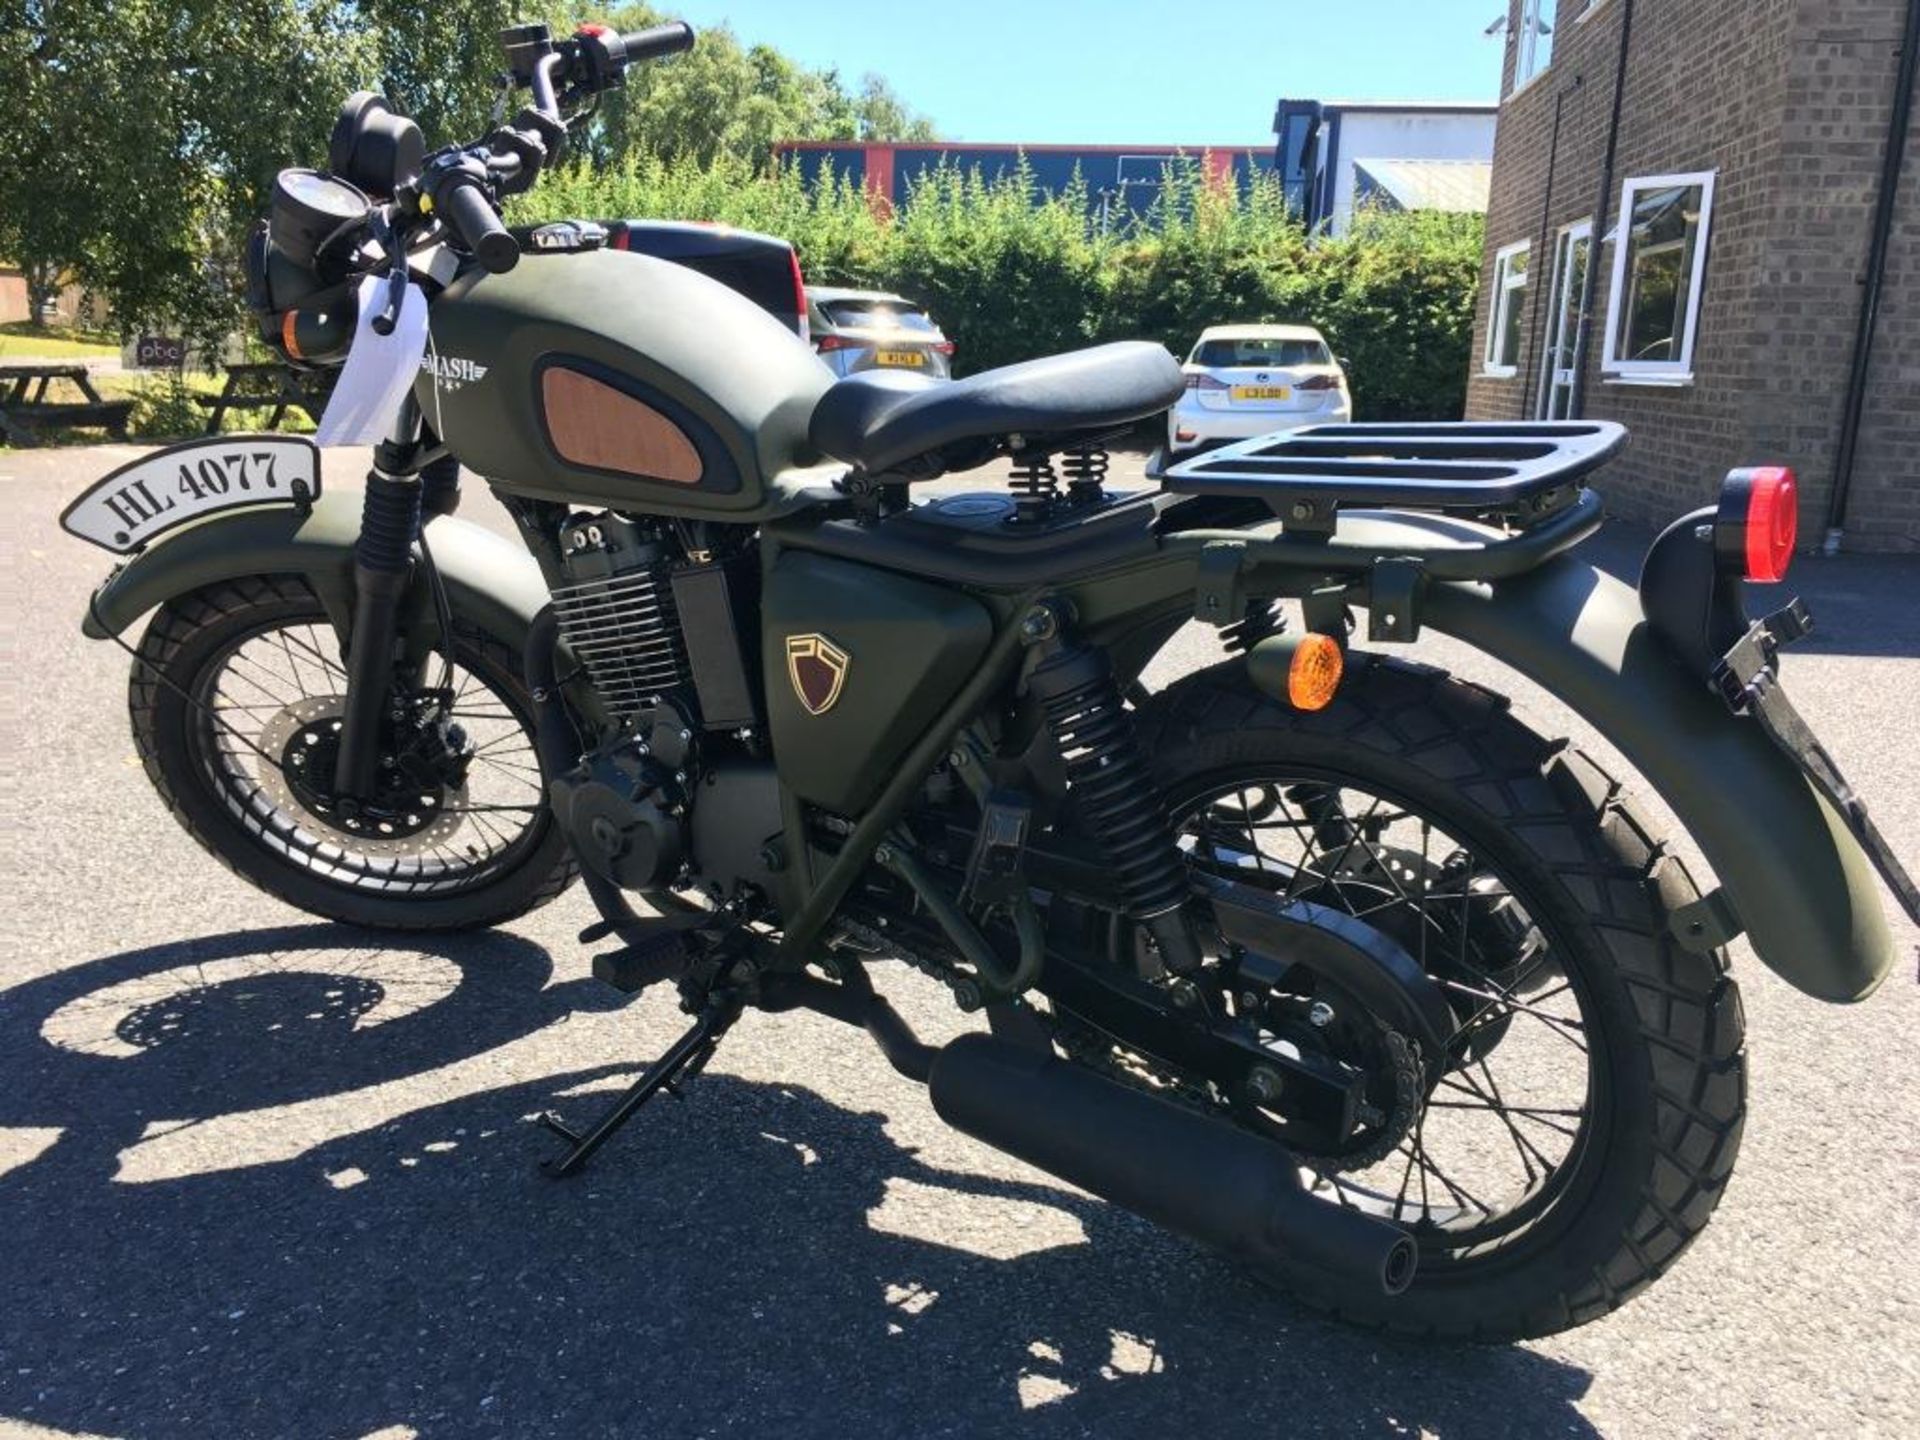 Mash Force 400 motorcycle, Year of Manufacture: 2019, Unregistered and no certificate of - Image 4 of 11